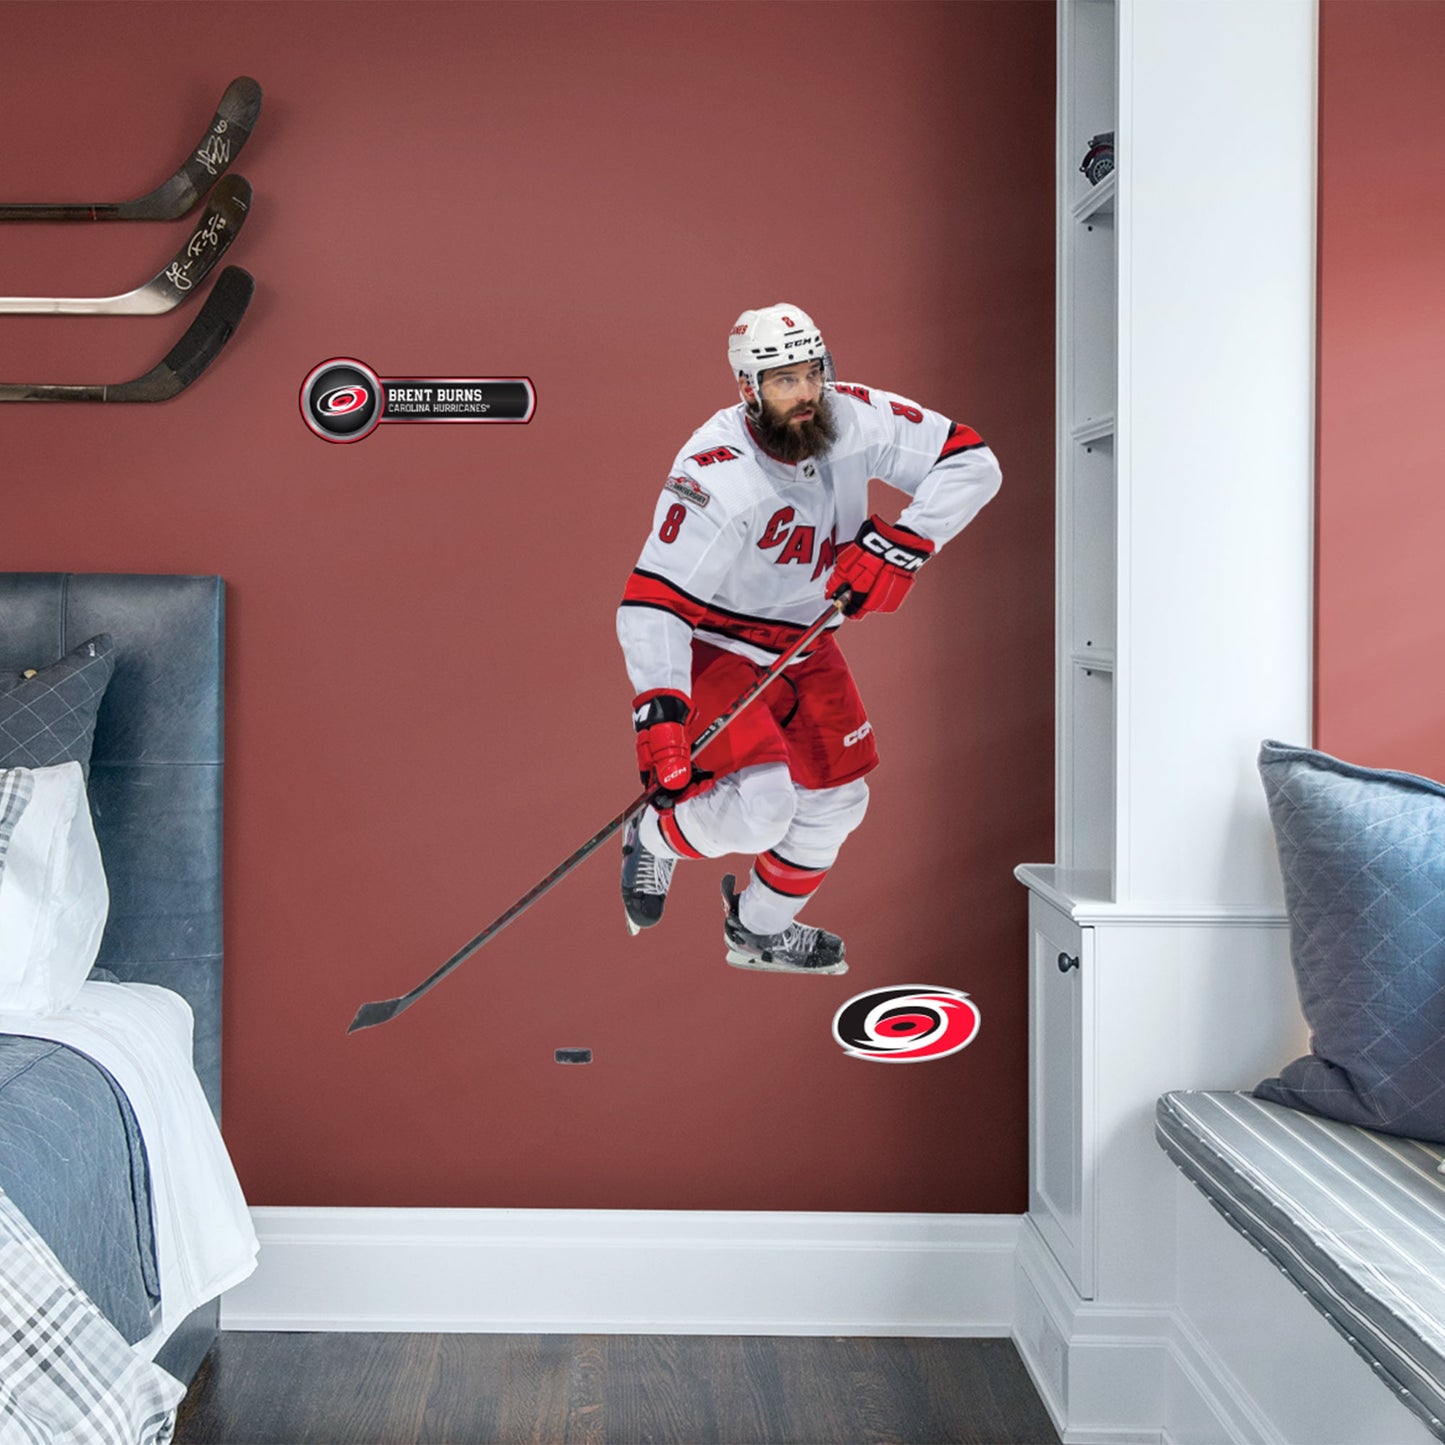 Carolina Hurricanes: Brent Burns - Officially Licensed NHL Removable Adhesive Decal